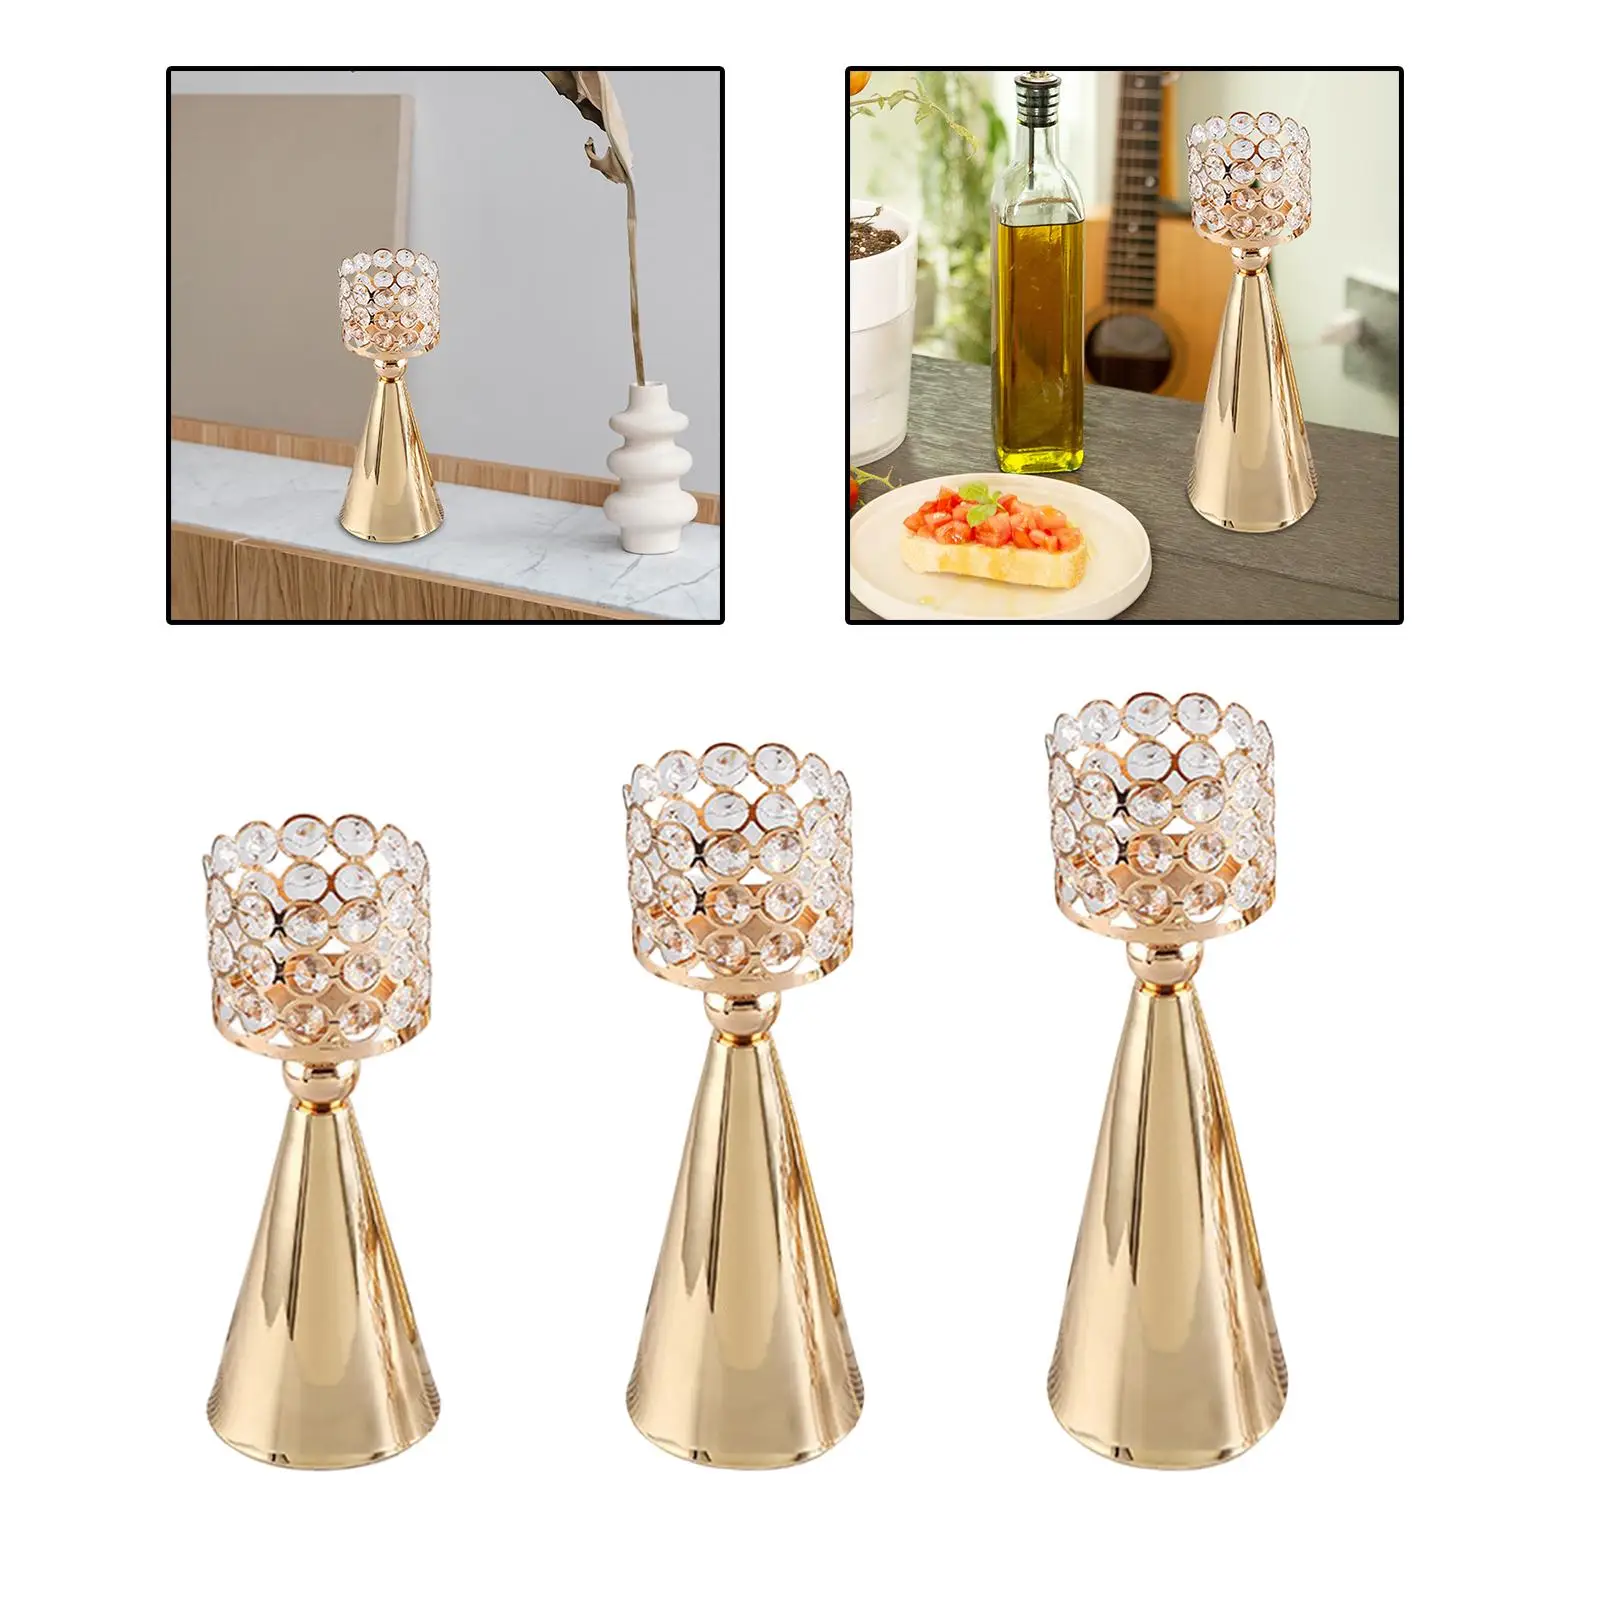 Holder Luxury with Deluxe Design Elegant Pillar Candlestick for Wedding Anniversary Table Centerpiece Celebration Dining Room